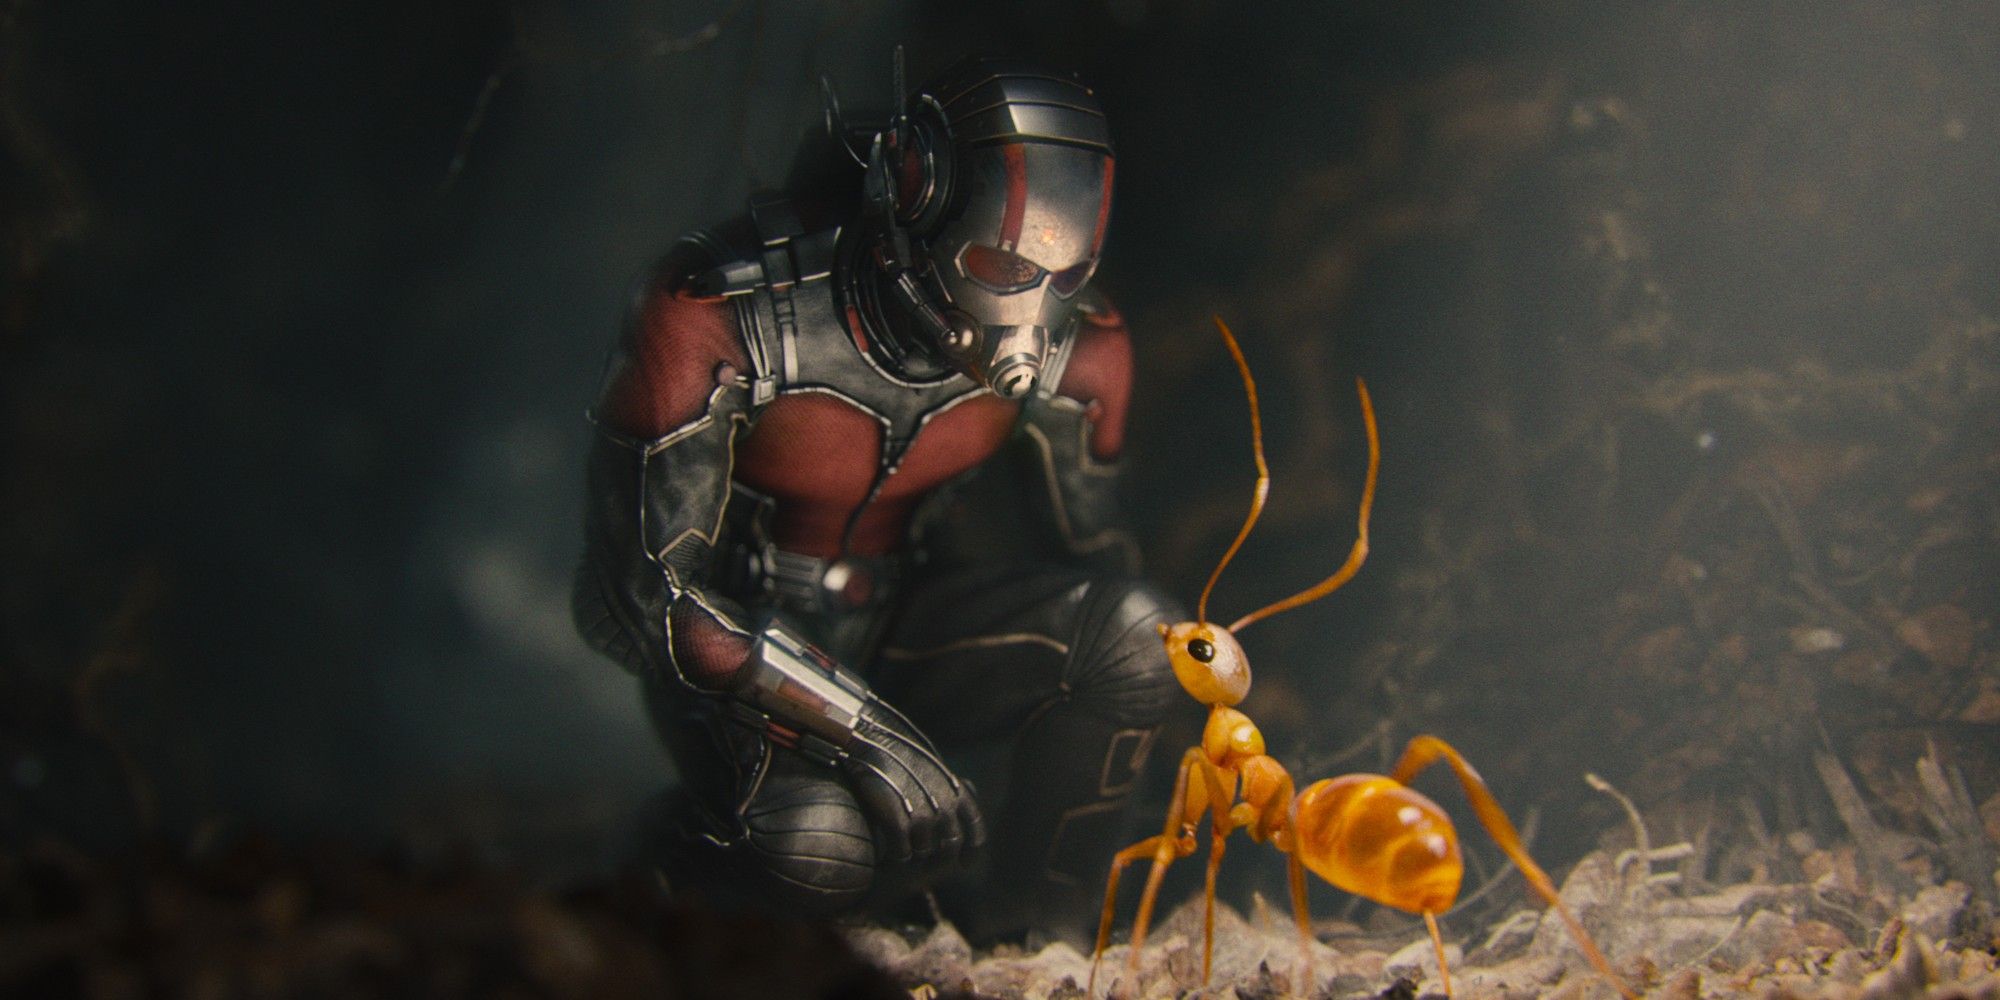 Ant Man with an ant